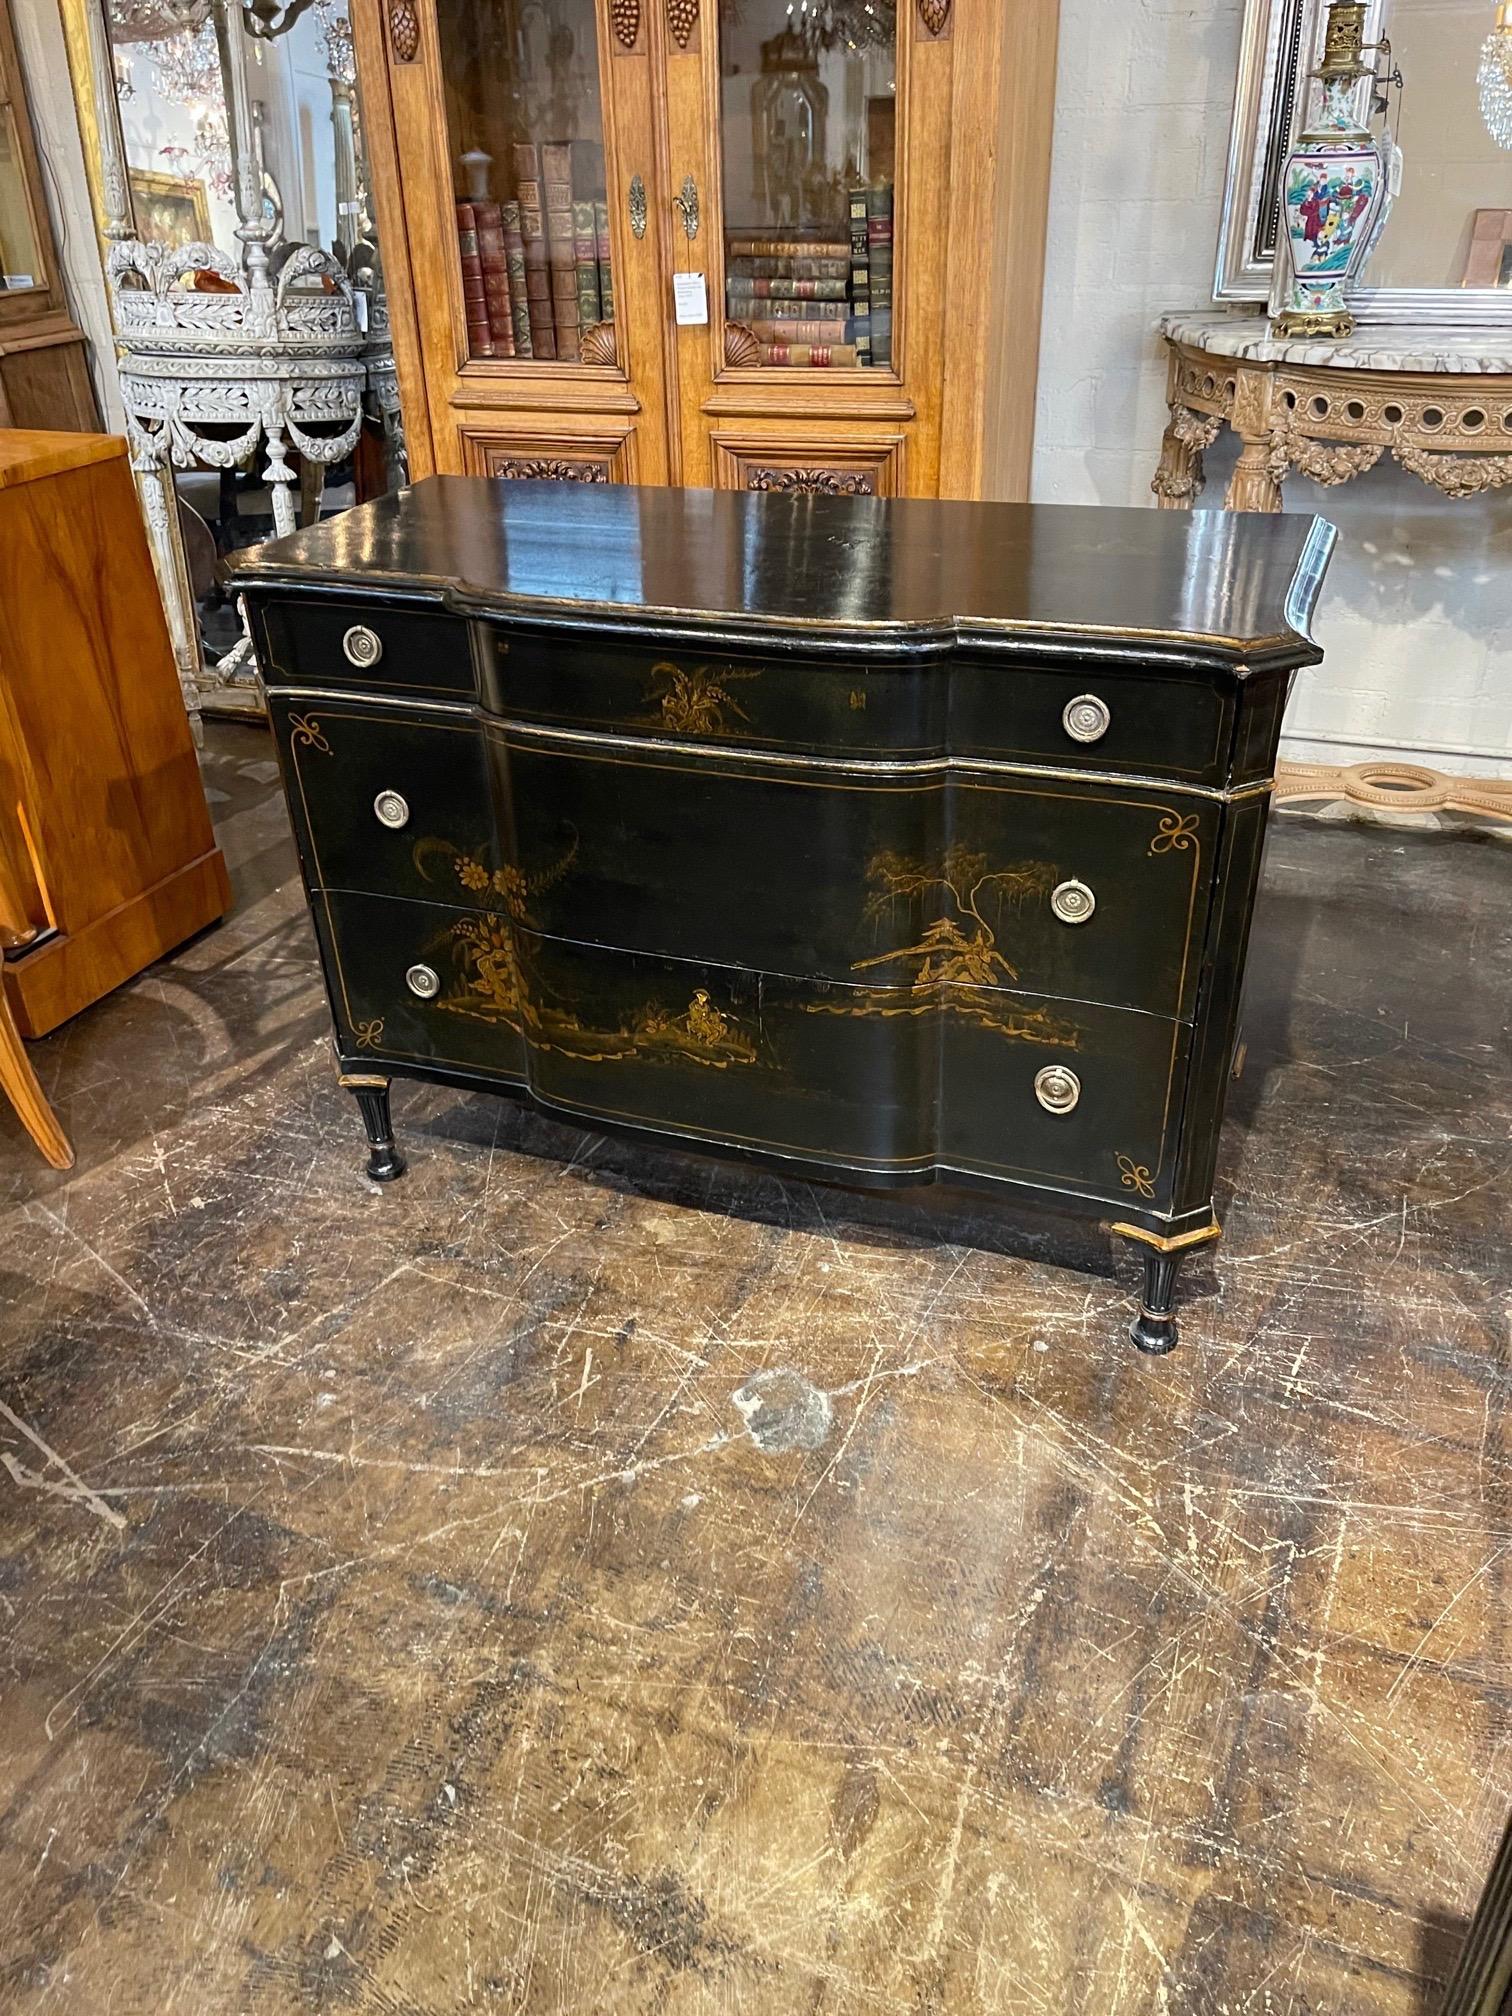 Beautiful Mid 20th century black lacquered Chinoiserie commode. Lovely painted images and pretty hardware as well. A very fine piece!!